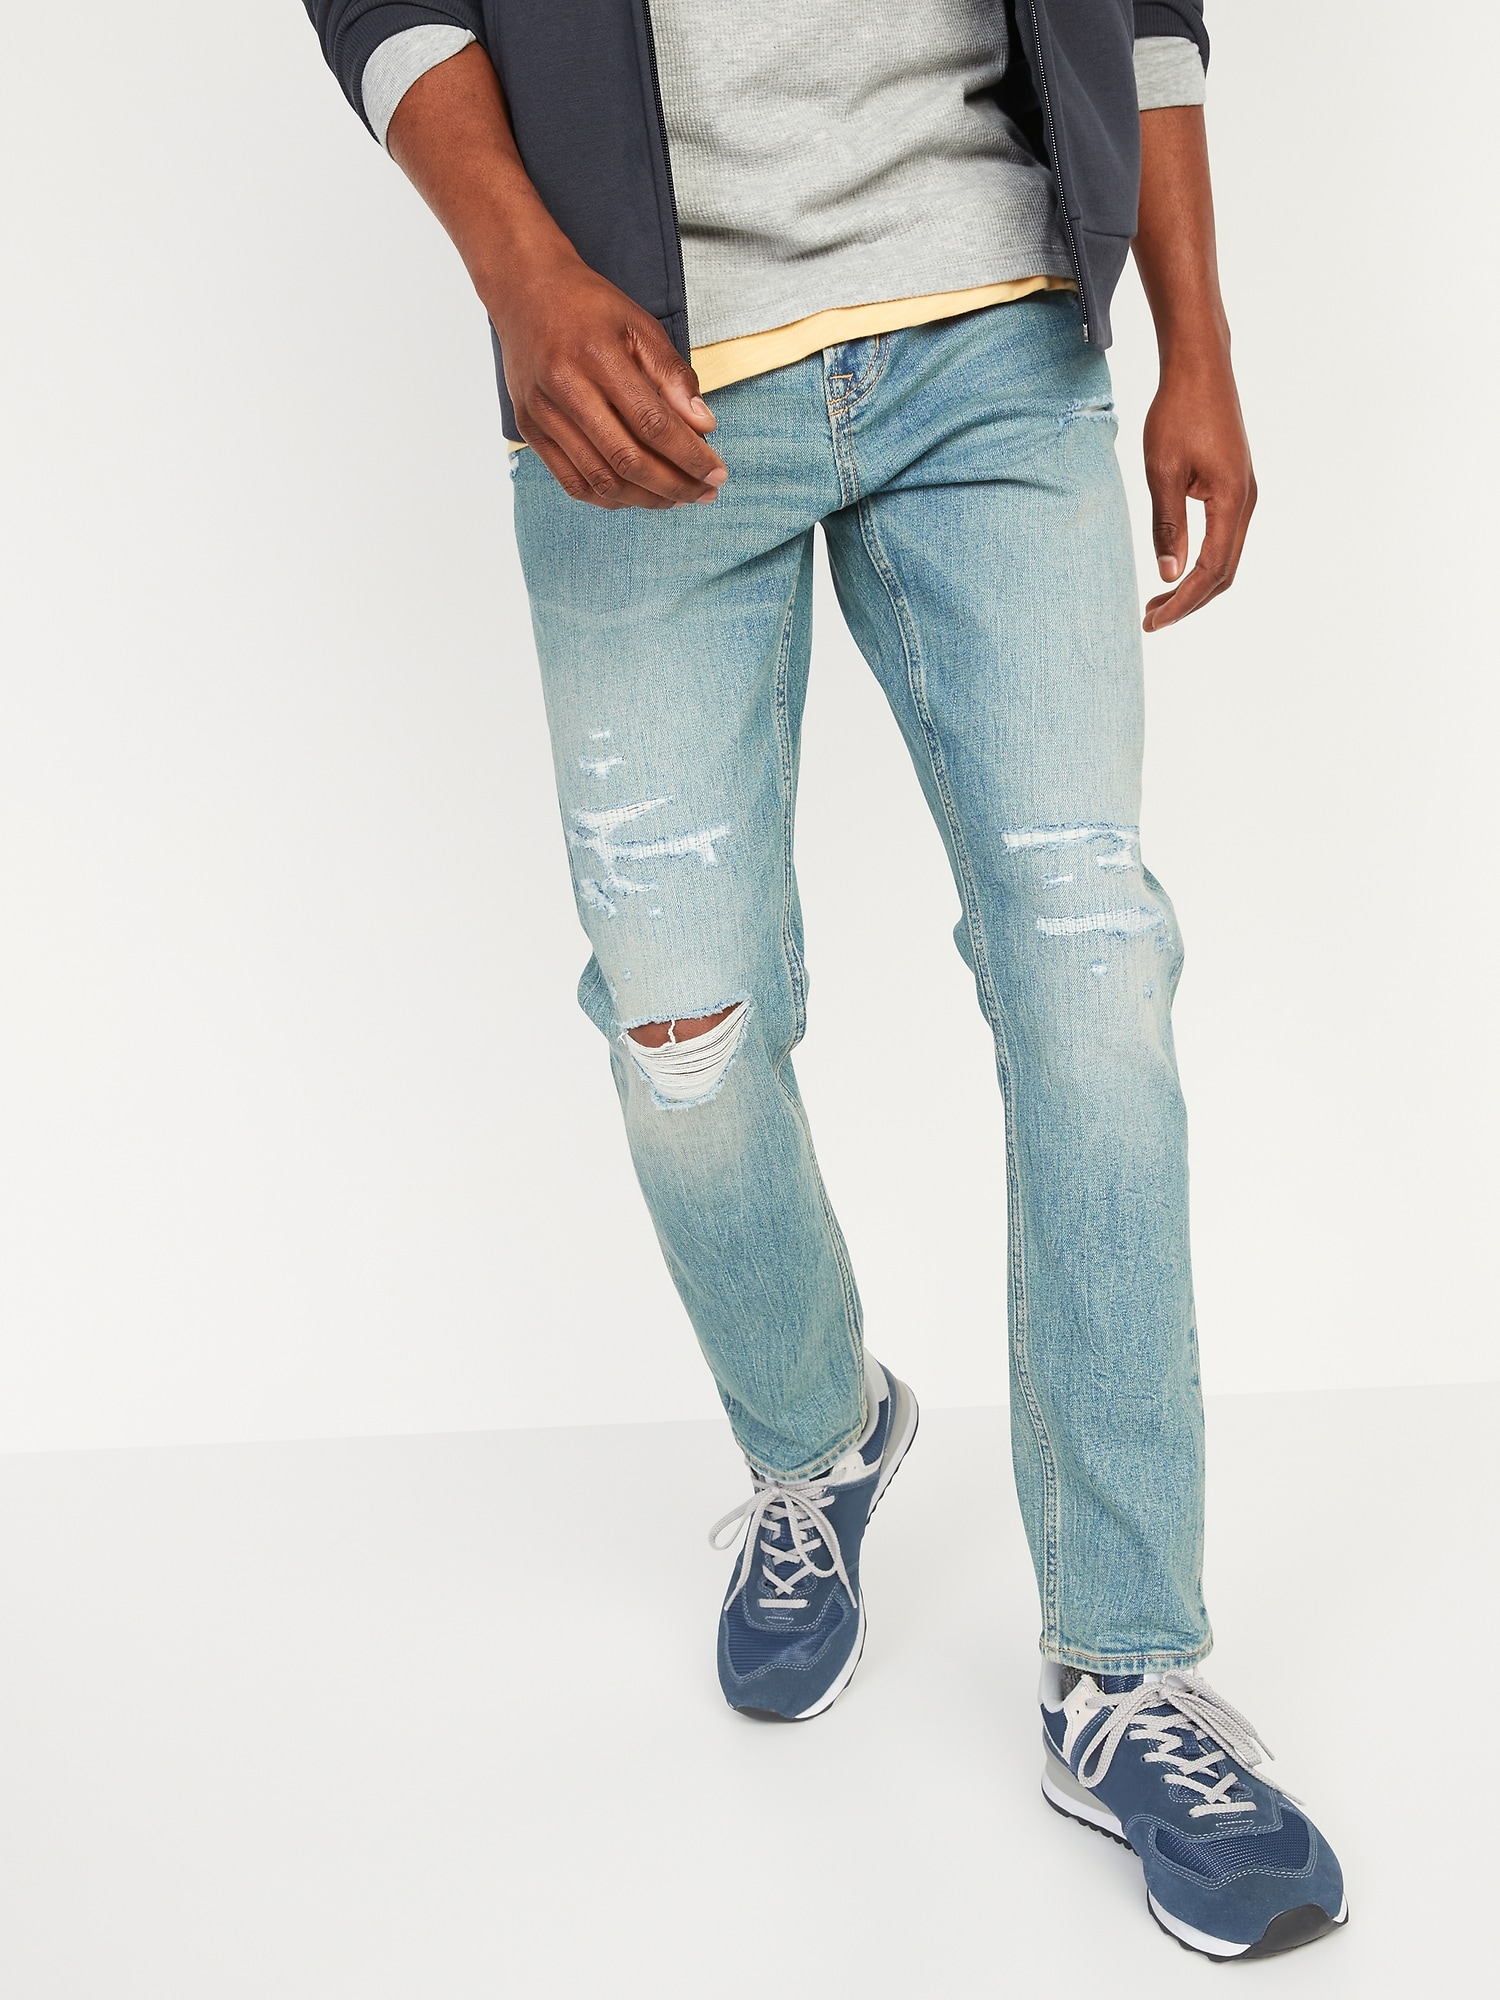 Relaxed Slim Taper Built-In Flex Ripped Jeans | Old Navy